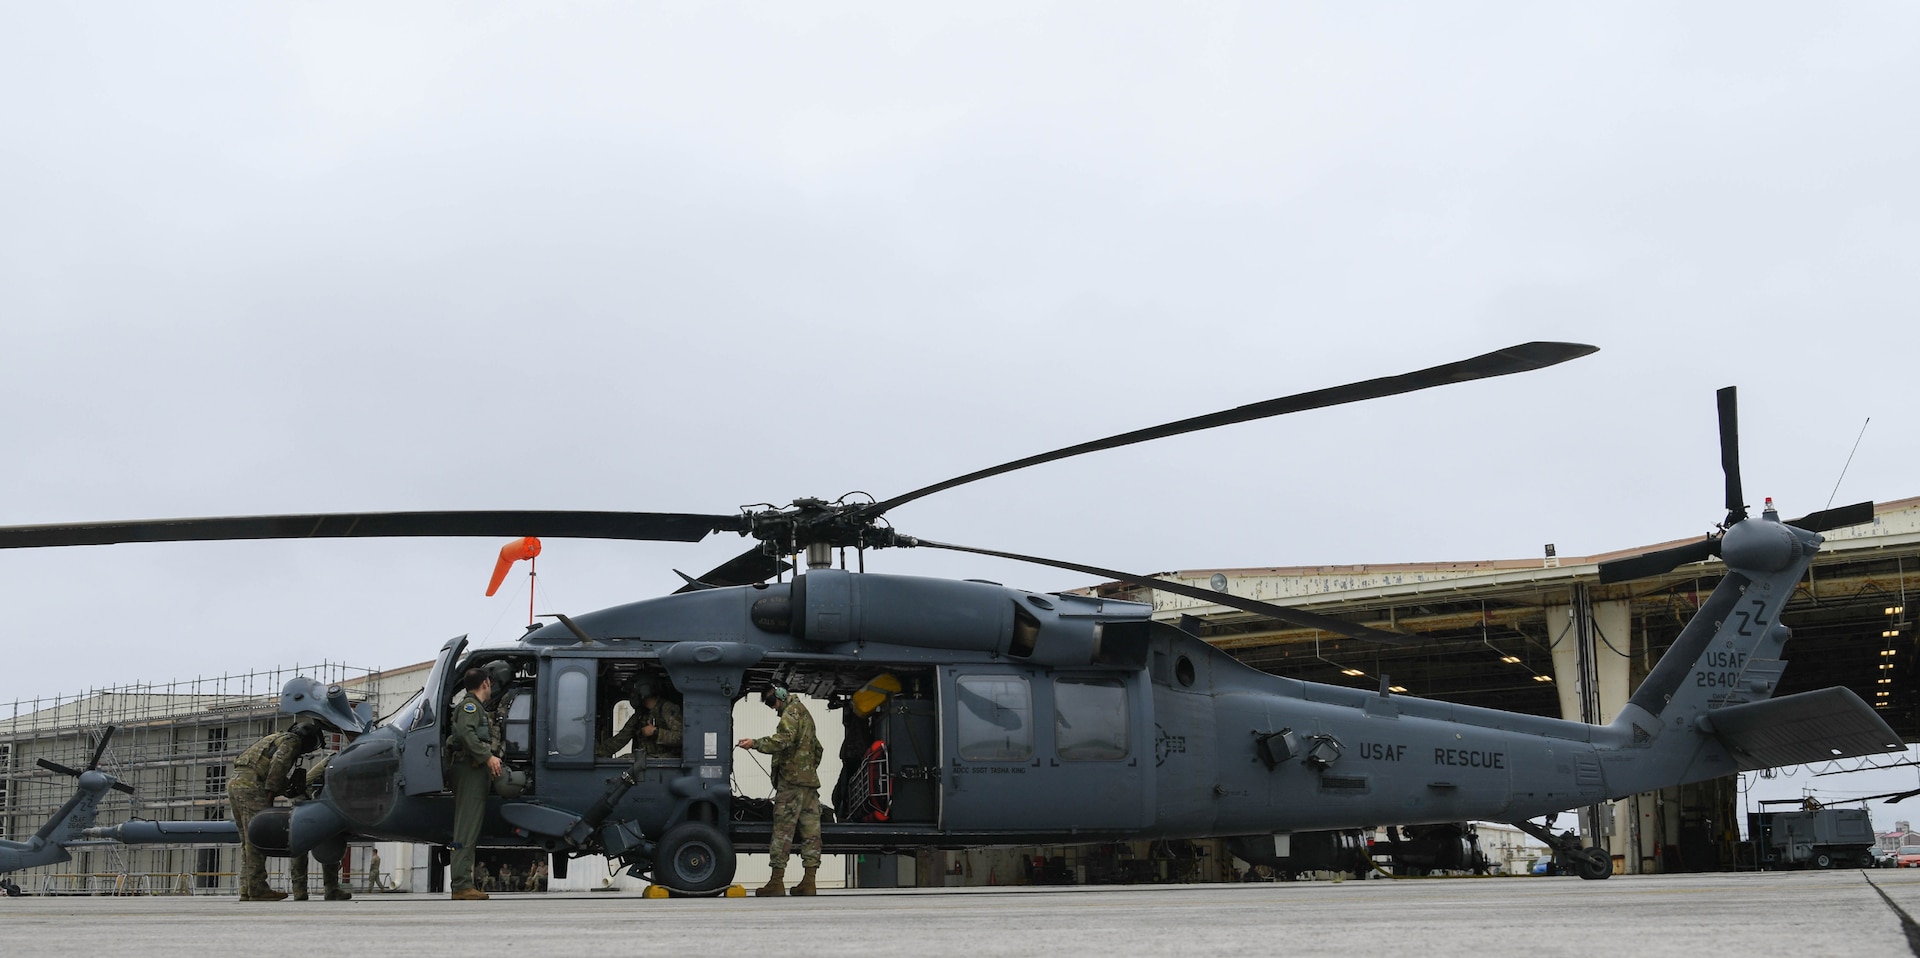 A legacy, grounded: Pave Hawk '401' retires